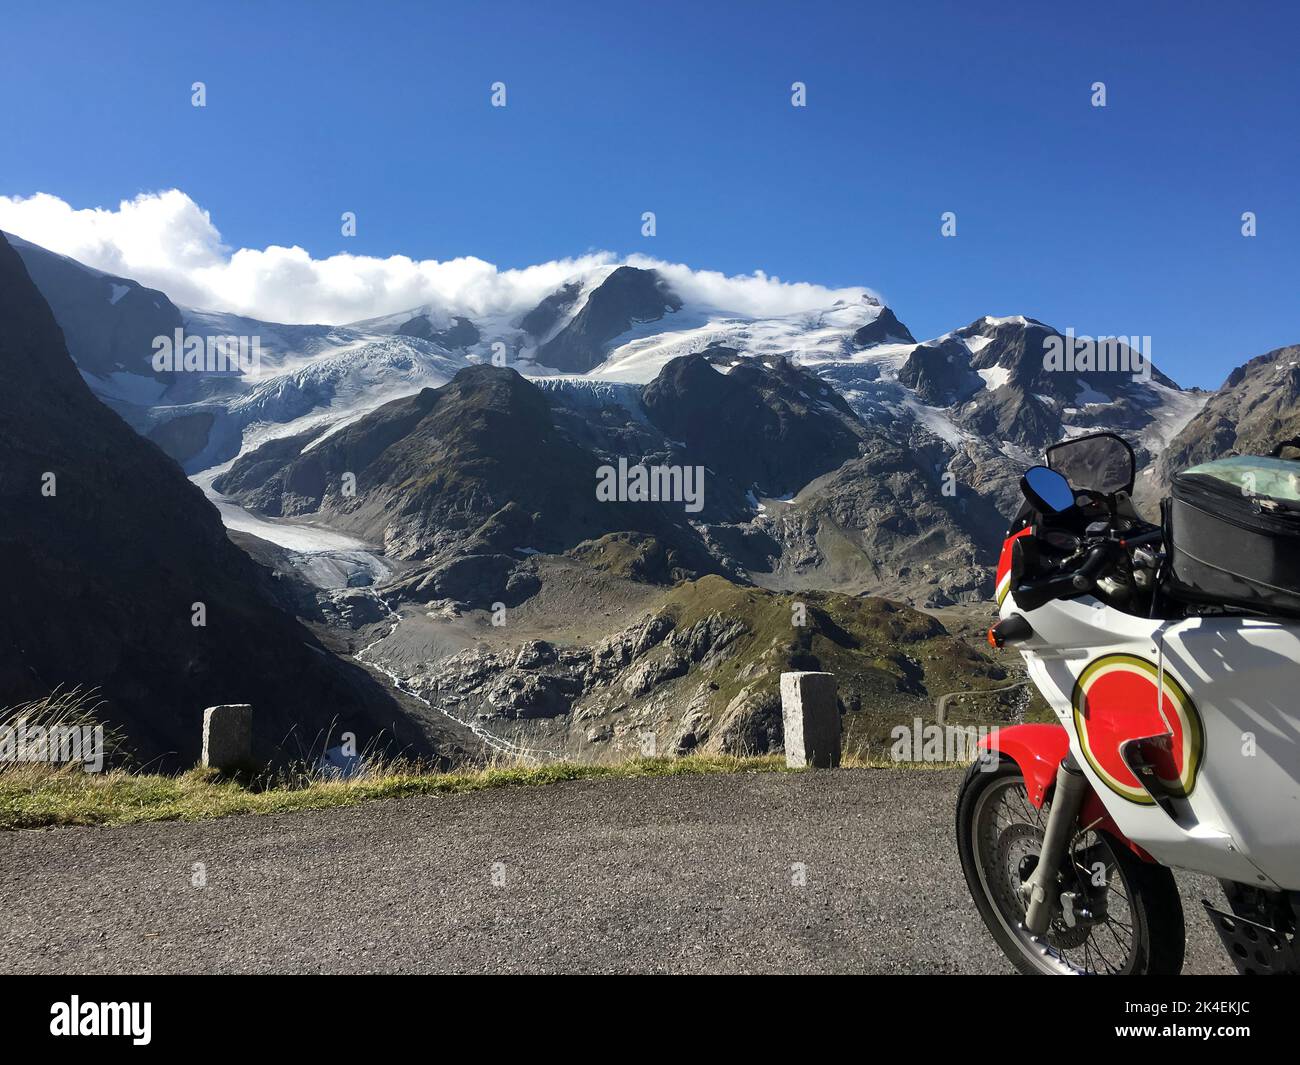 An adventure motorcycle is parked at Susten Pass in the Swiss alps. Stock Photo